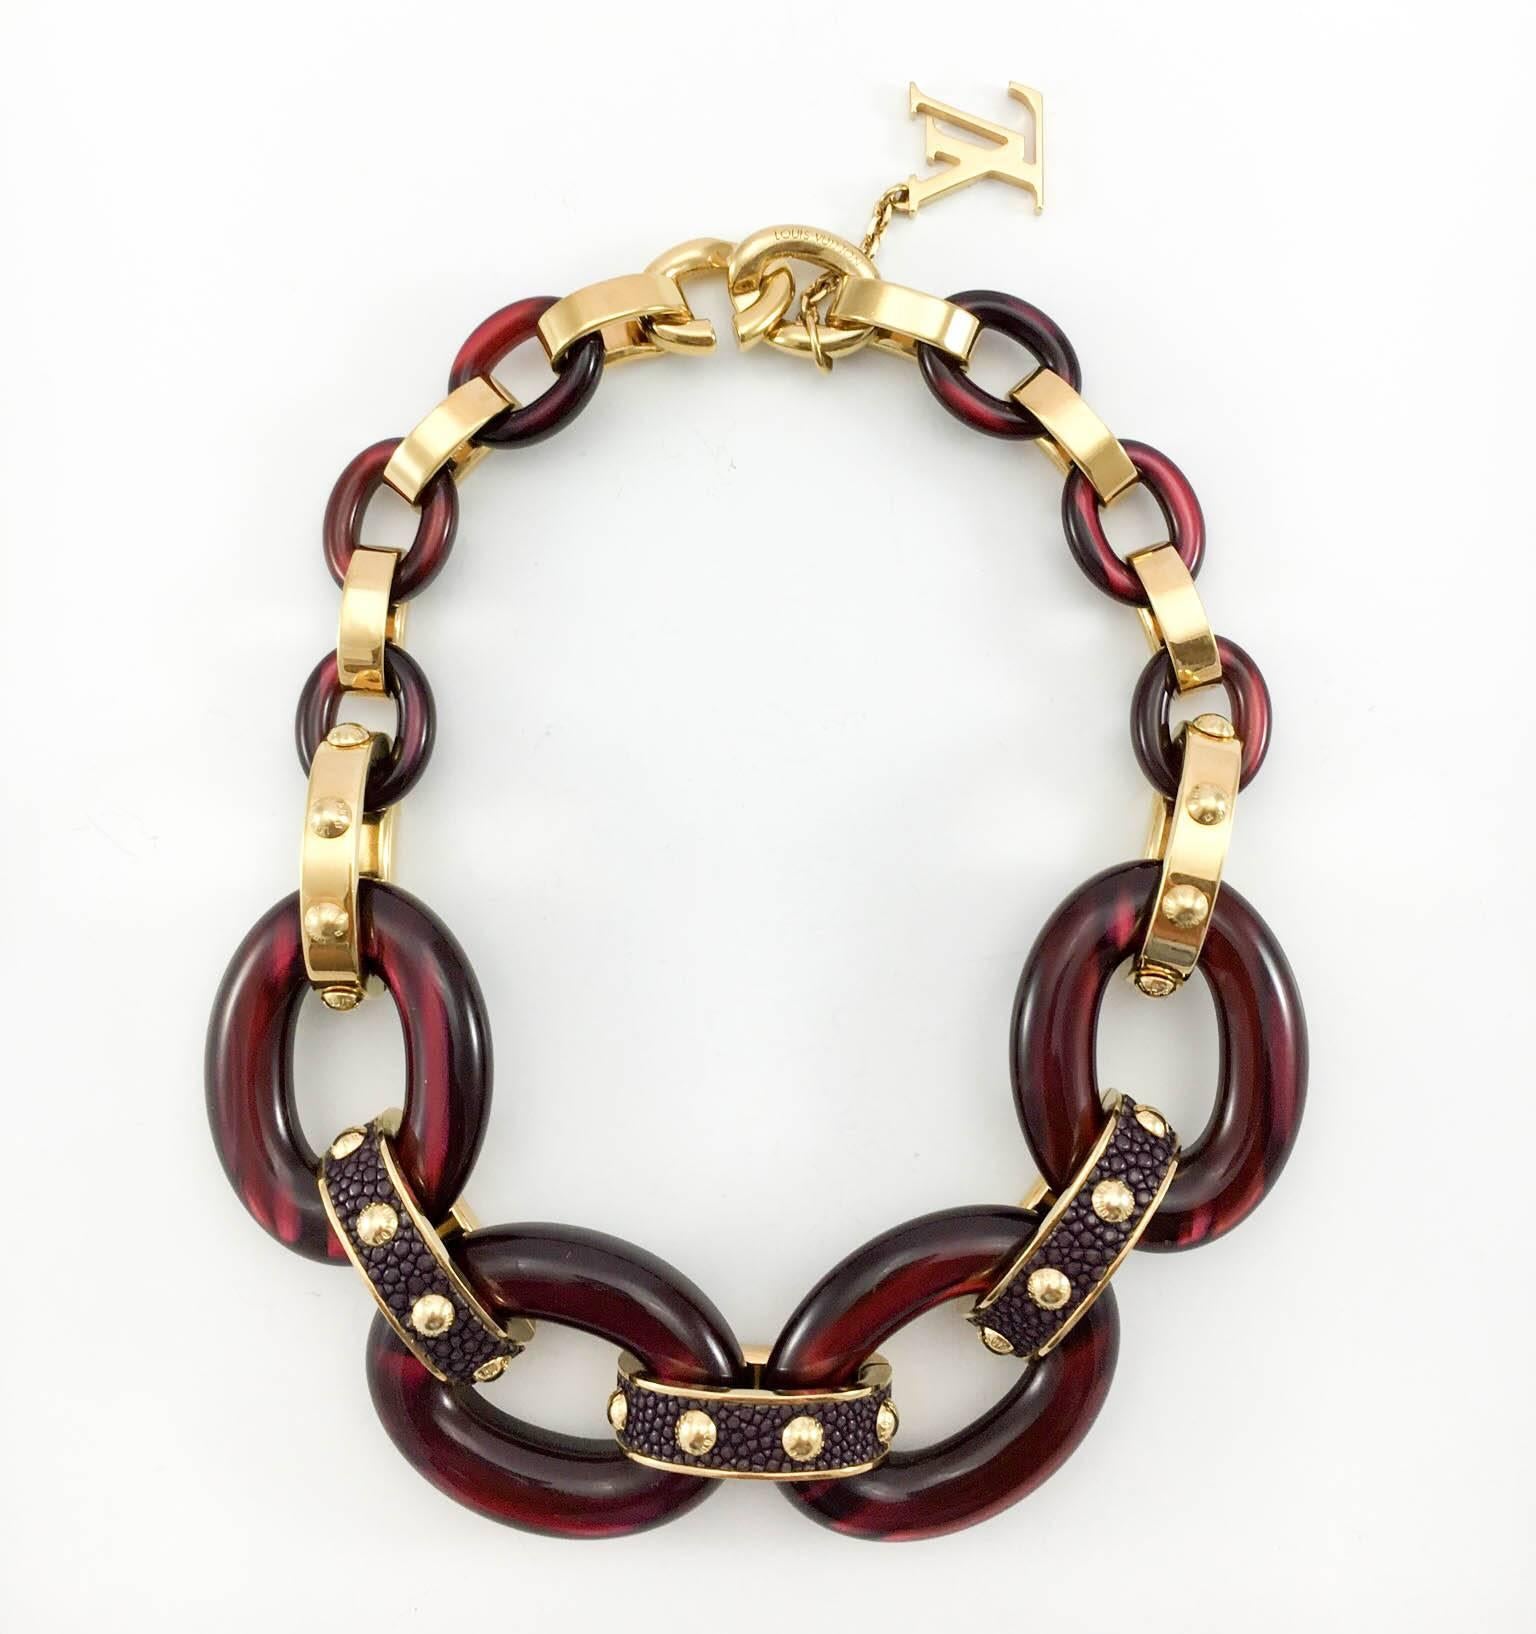 Louis Vuitton 'Gimme a Clue' Collection Necklace - 2011 In Excellent Condition For Sale In London, Chelsea